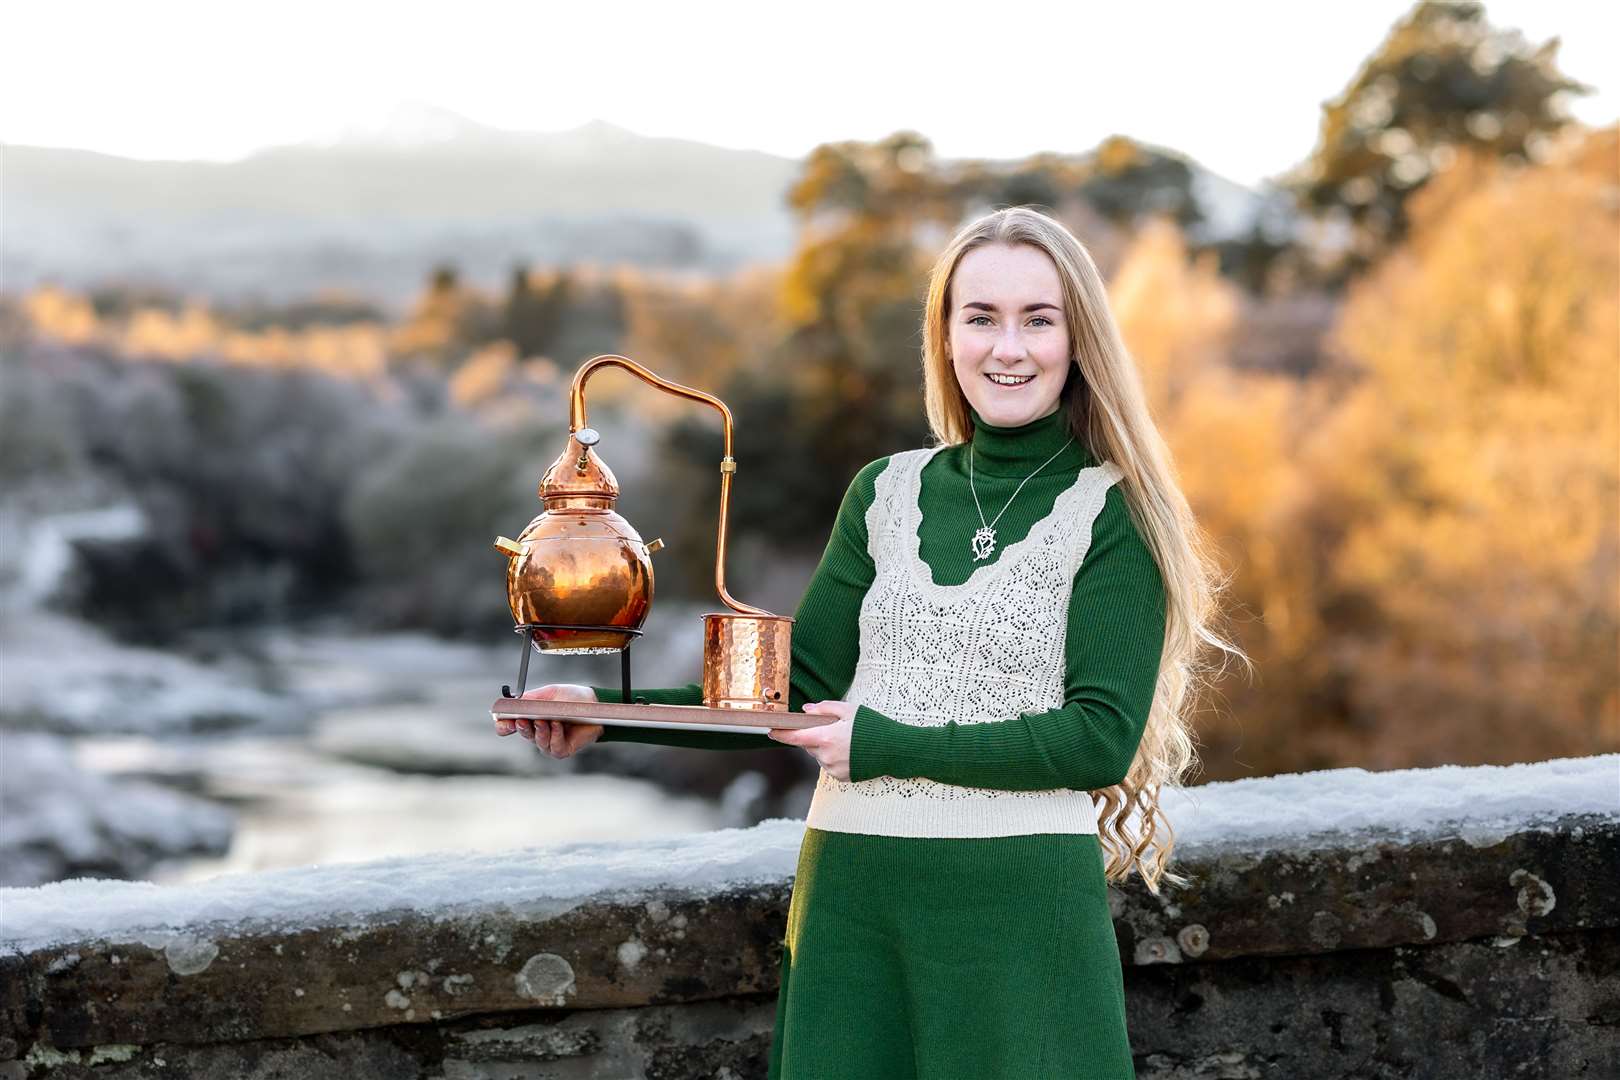 Ciara Bow aims to raise £25,000 to purchase equipment to produce botanical spirits using an 'ancient' family recipe.